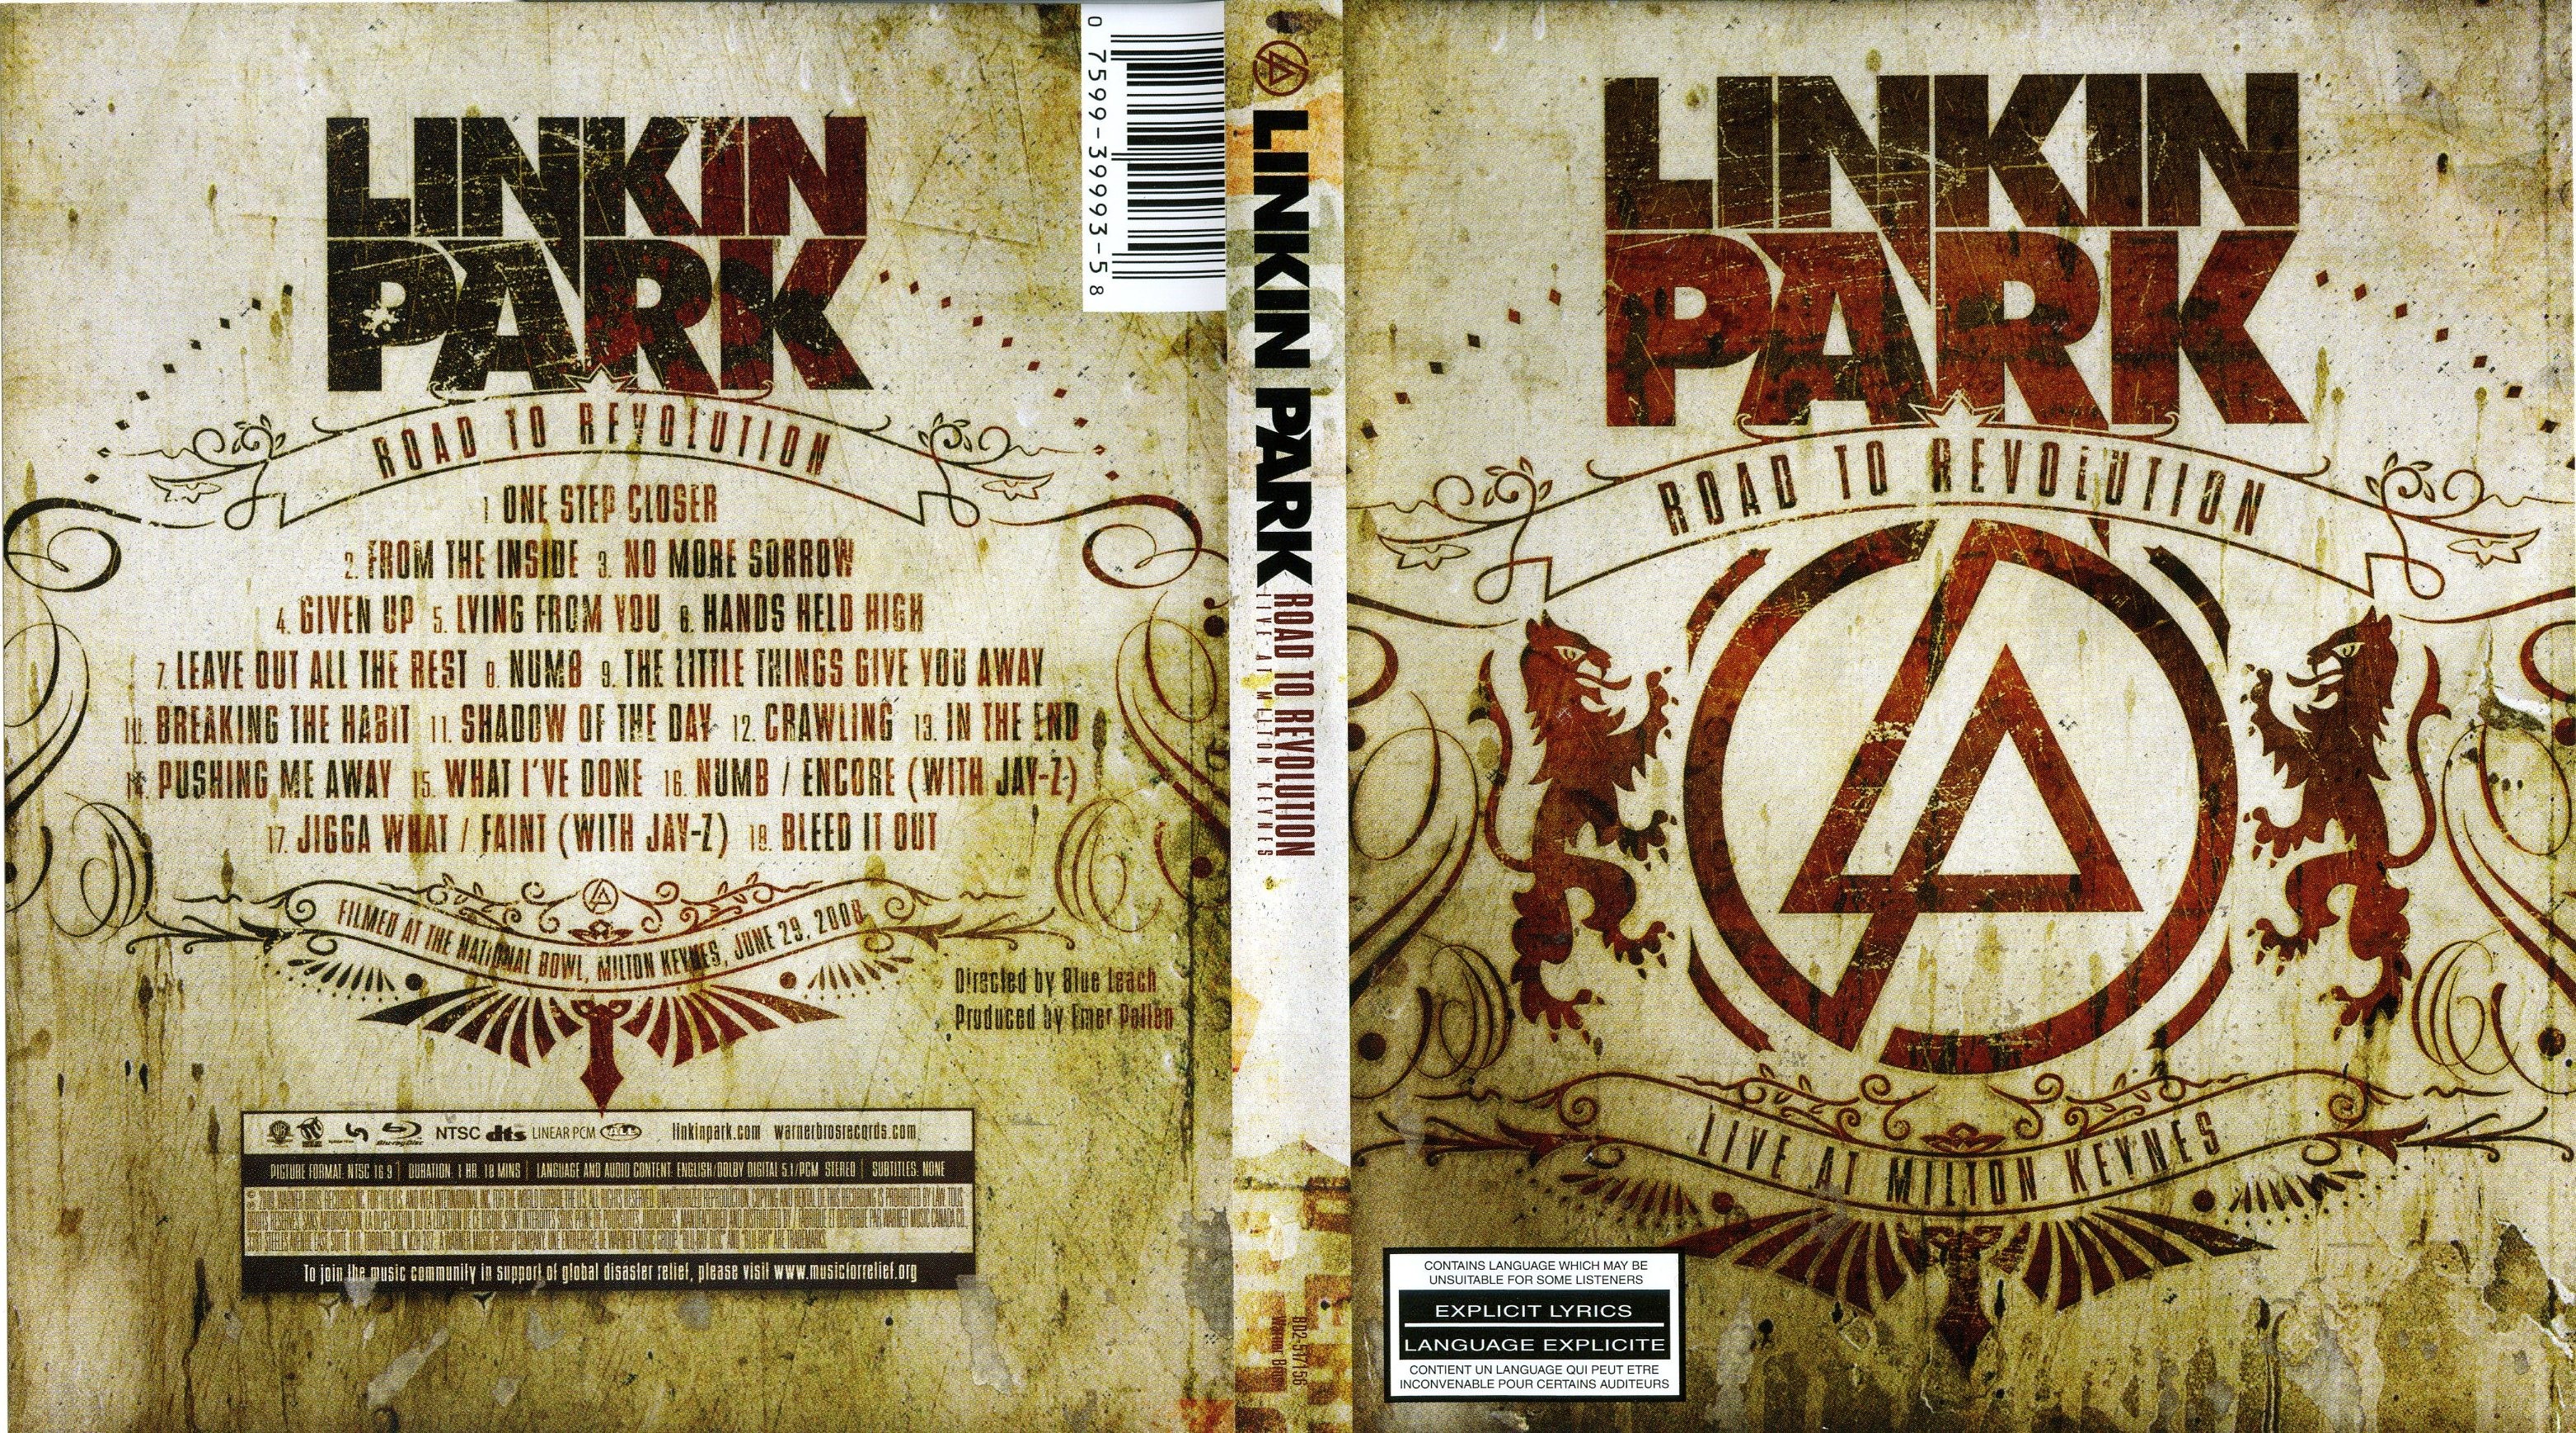 Jaquette DVD Linkin Park - Road To Revolution (BLU-RAY)